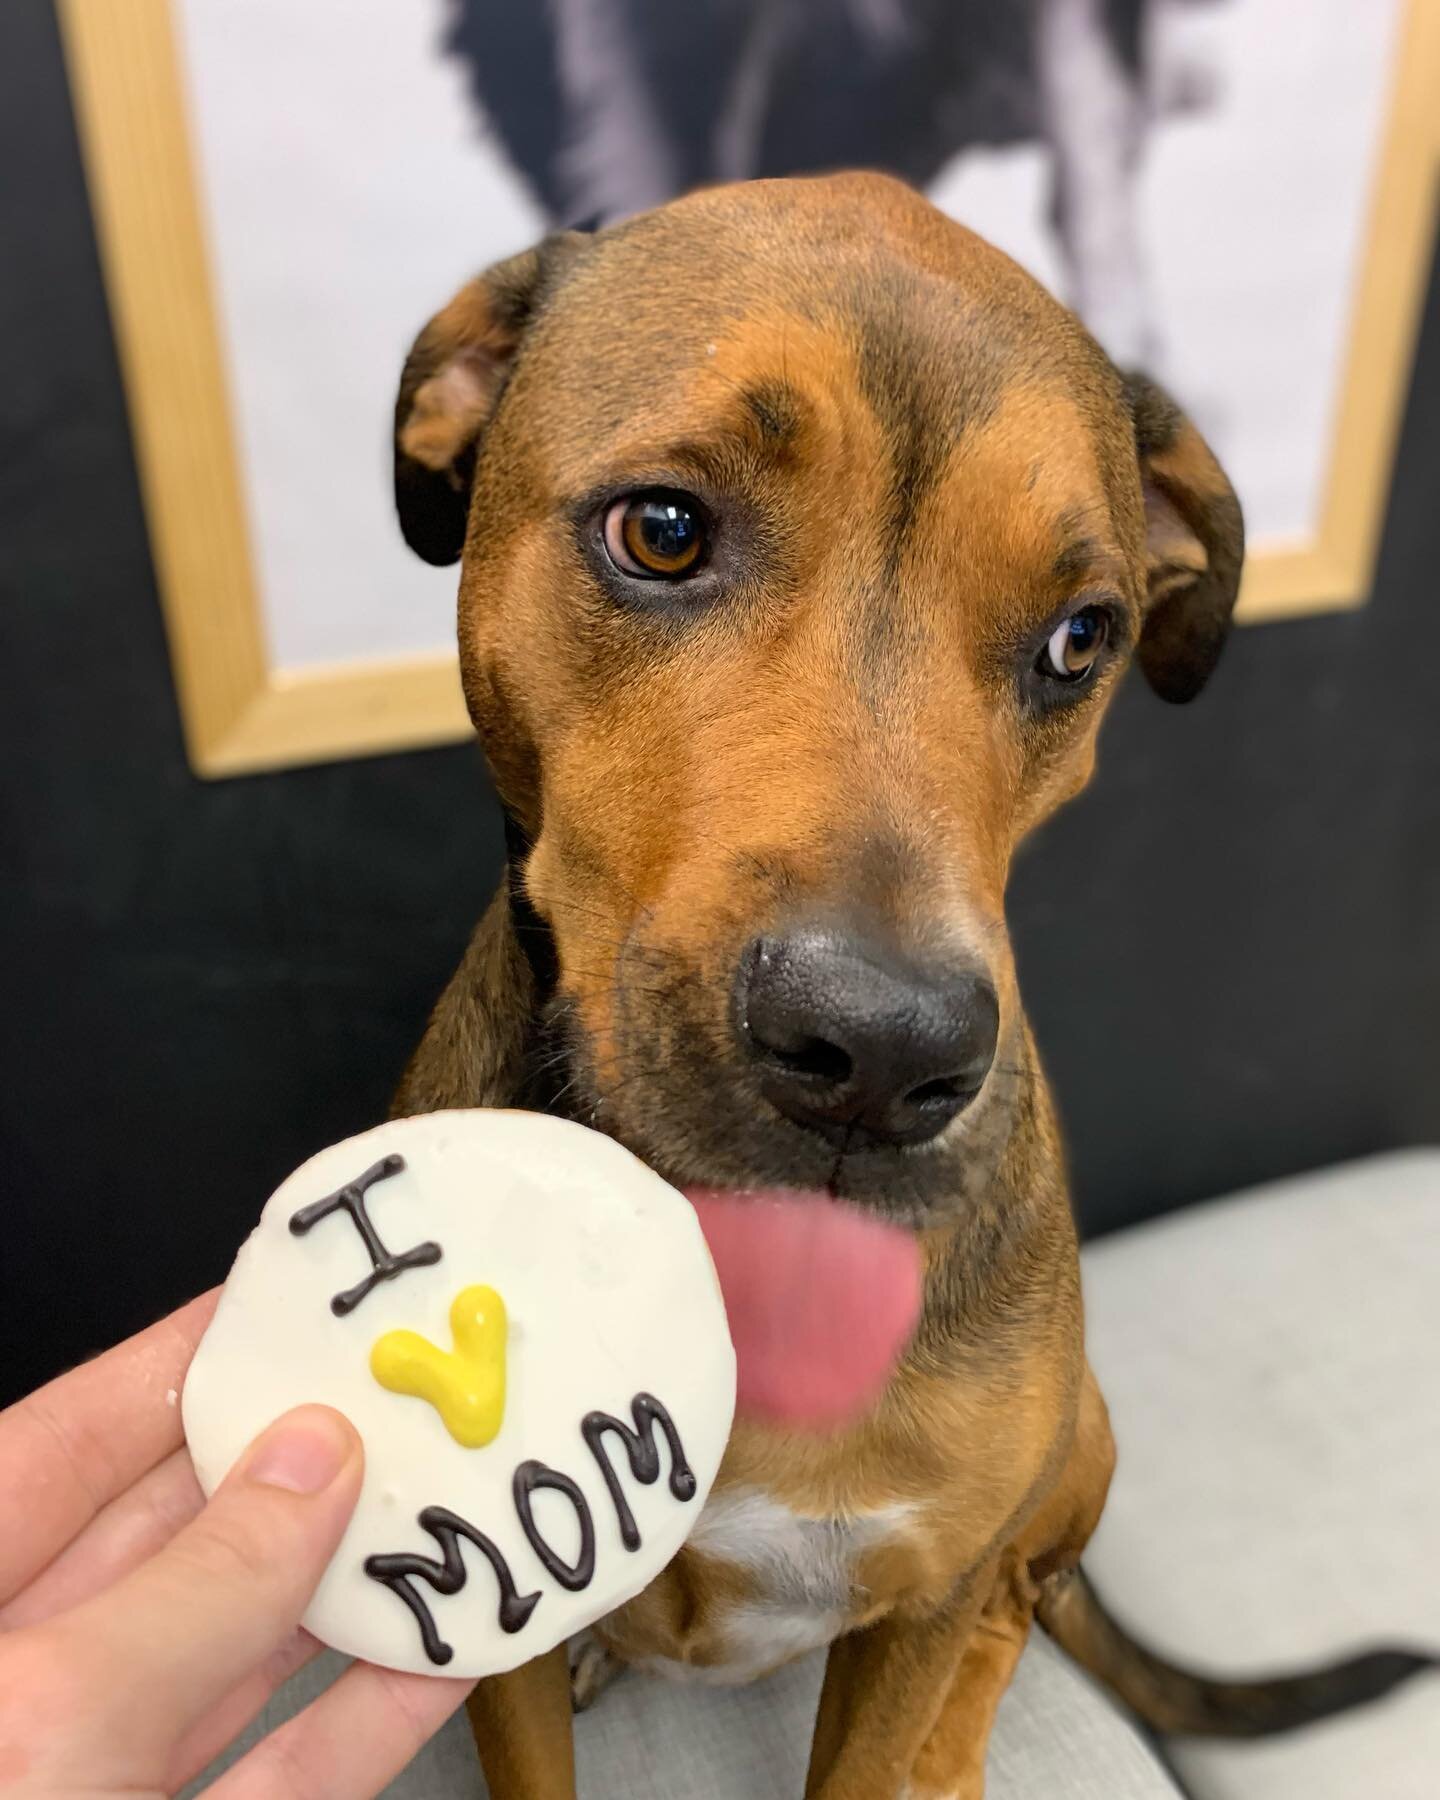 These kk pups love their mamas! McClain loves his mama so much that he couldn&rsquo;t wait to eat his cookie before the picture *last pic* 😂🍪💛

This week only - Mother&rsquo;s Day Cookies $3 each